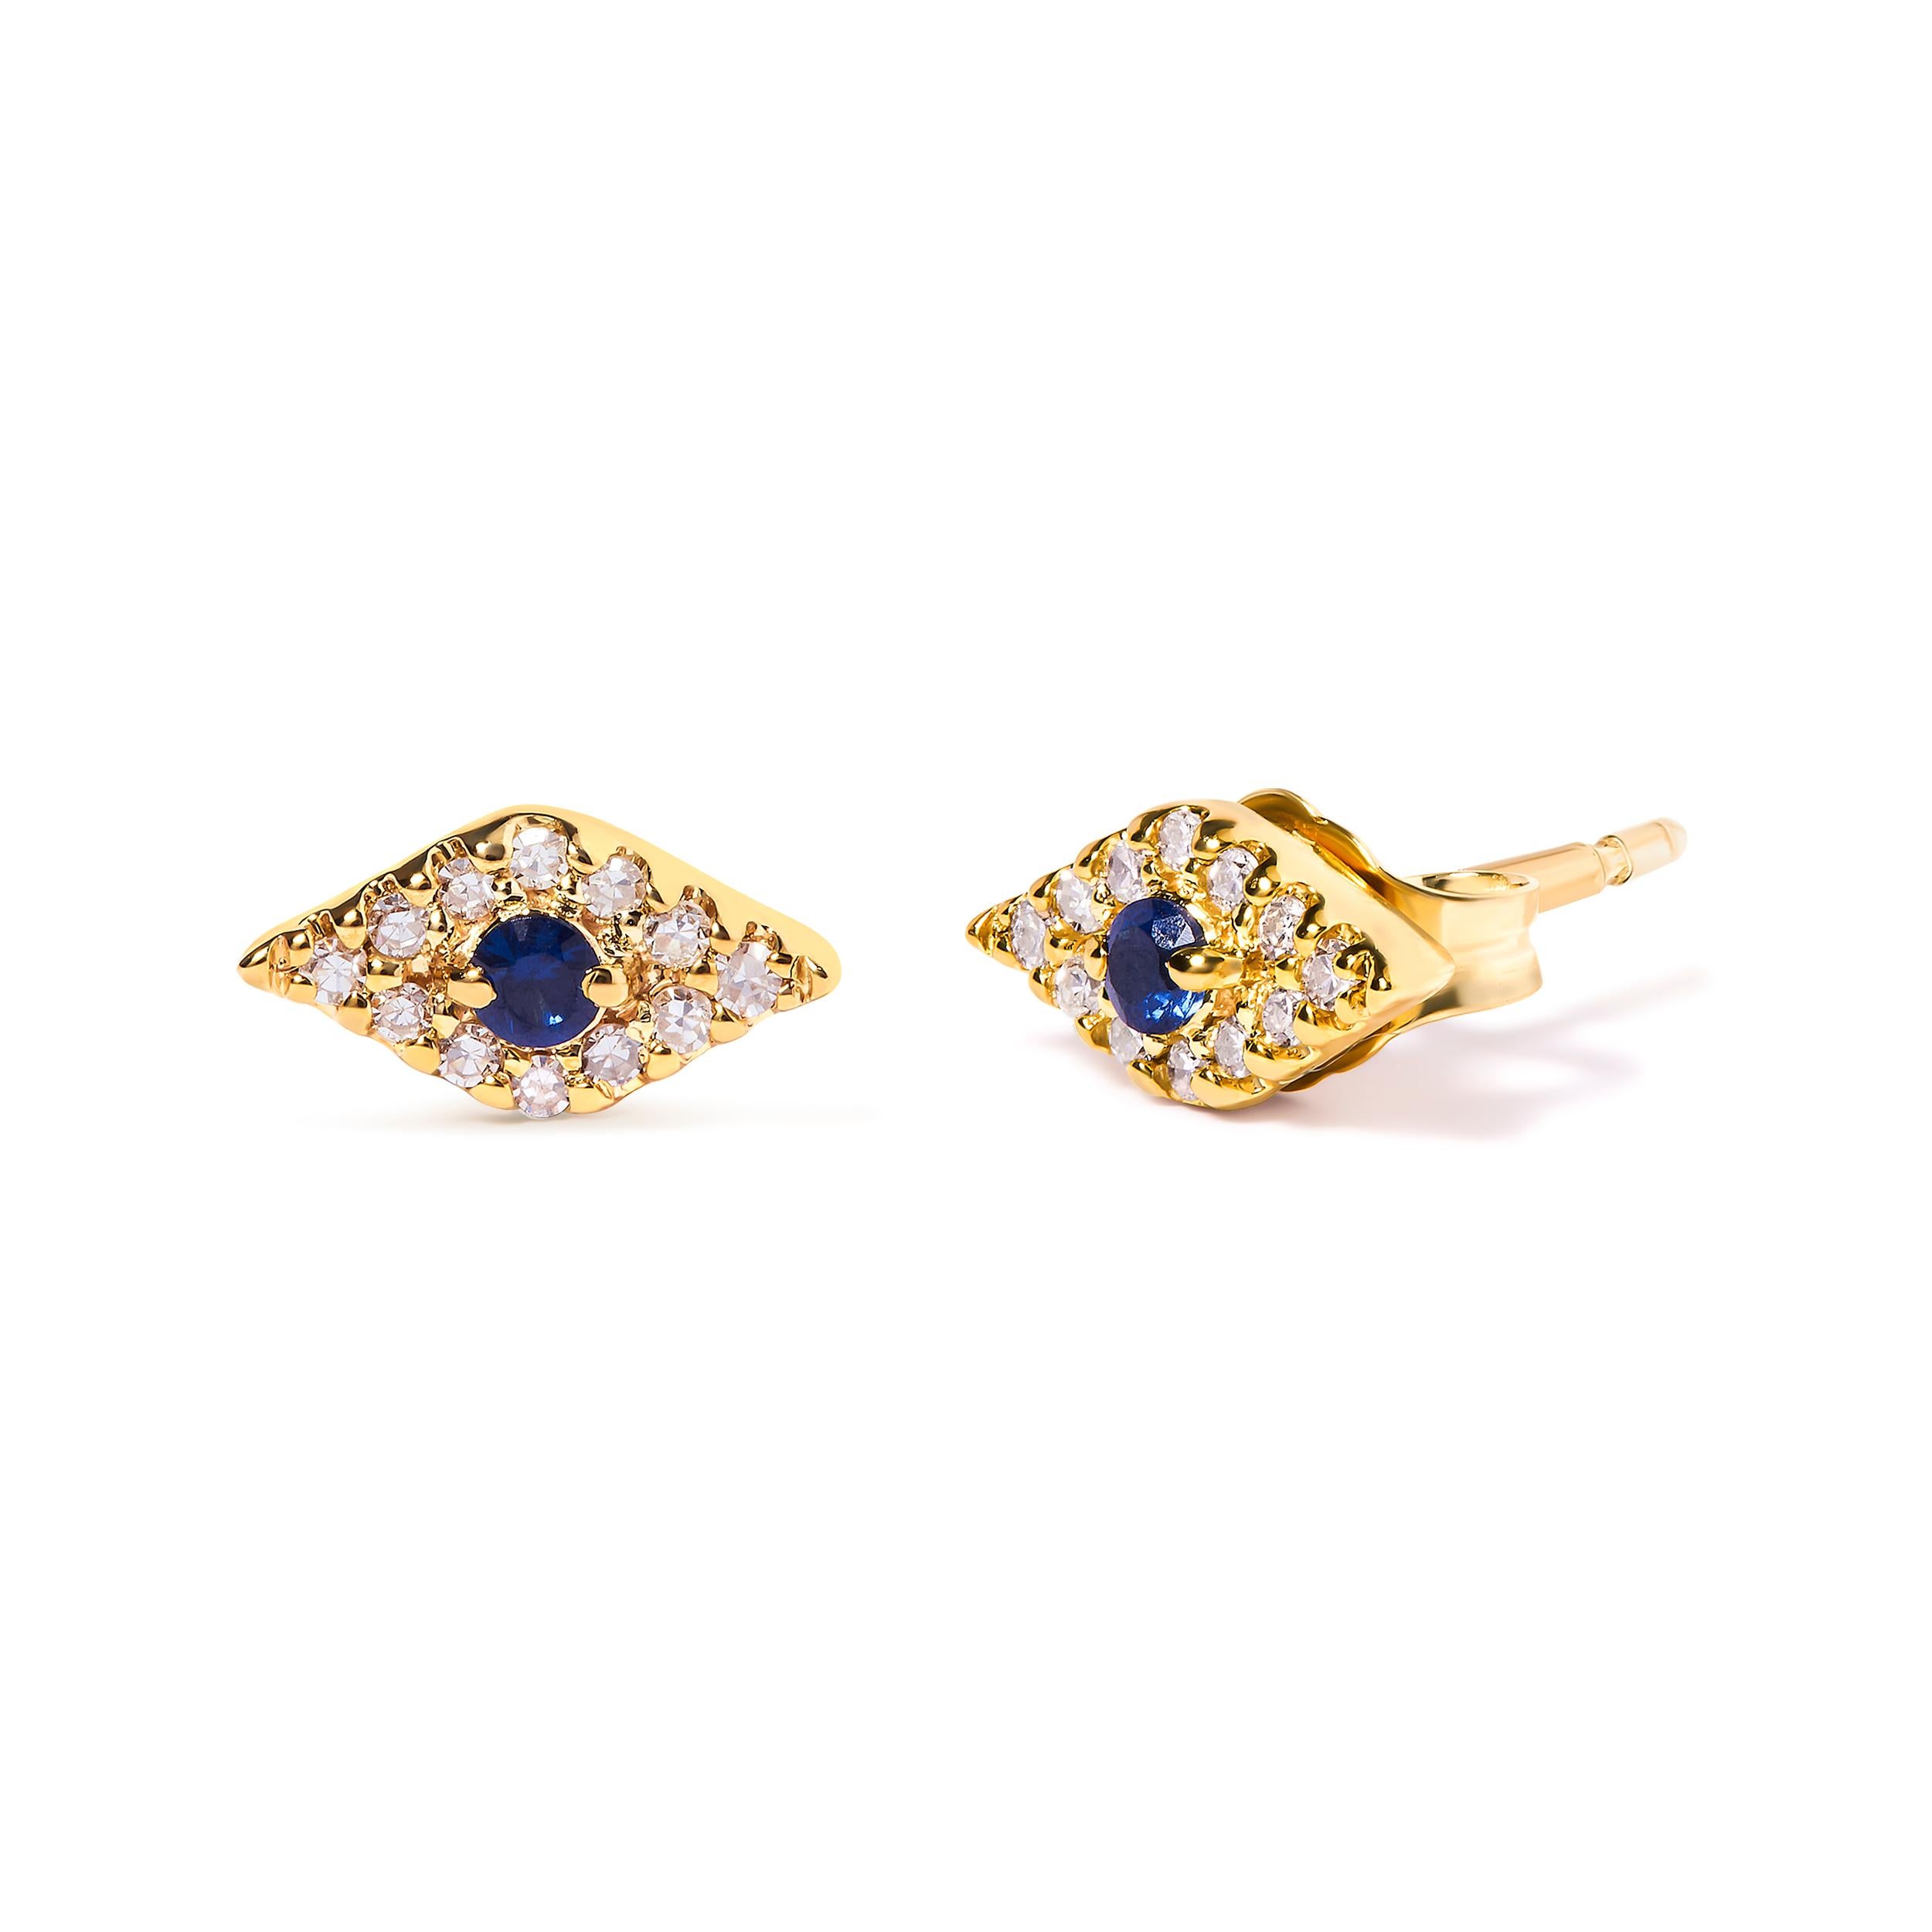 Introducing a mesmerizing piece that will captivate all who lay eyes on it. Behold the 10K Yellow Gold Evil Eye Stud Earring, adorned with a stunning Blue Sapphire and Diamond Accent. Crafted with exquisite attention to detail, this earring is a